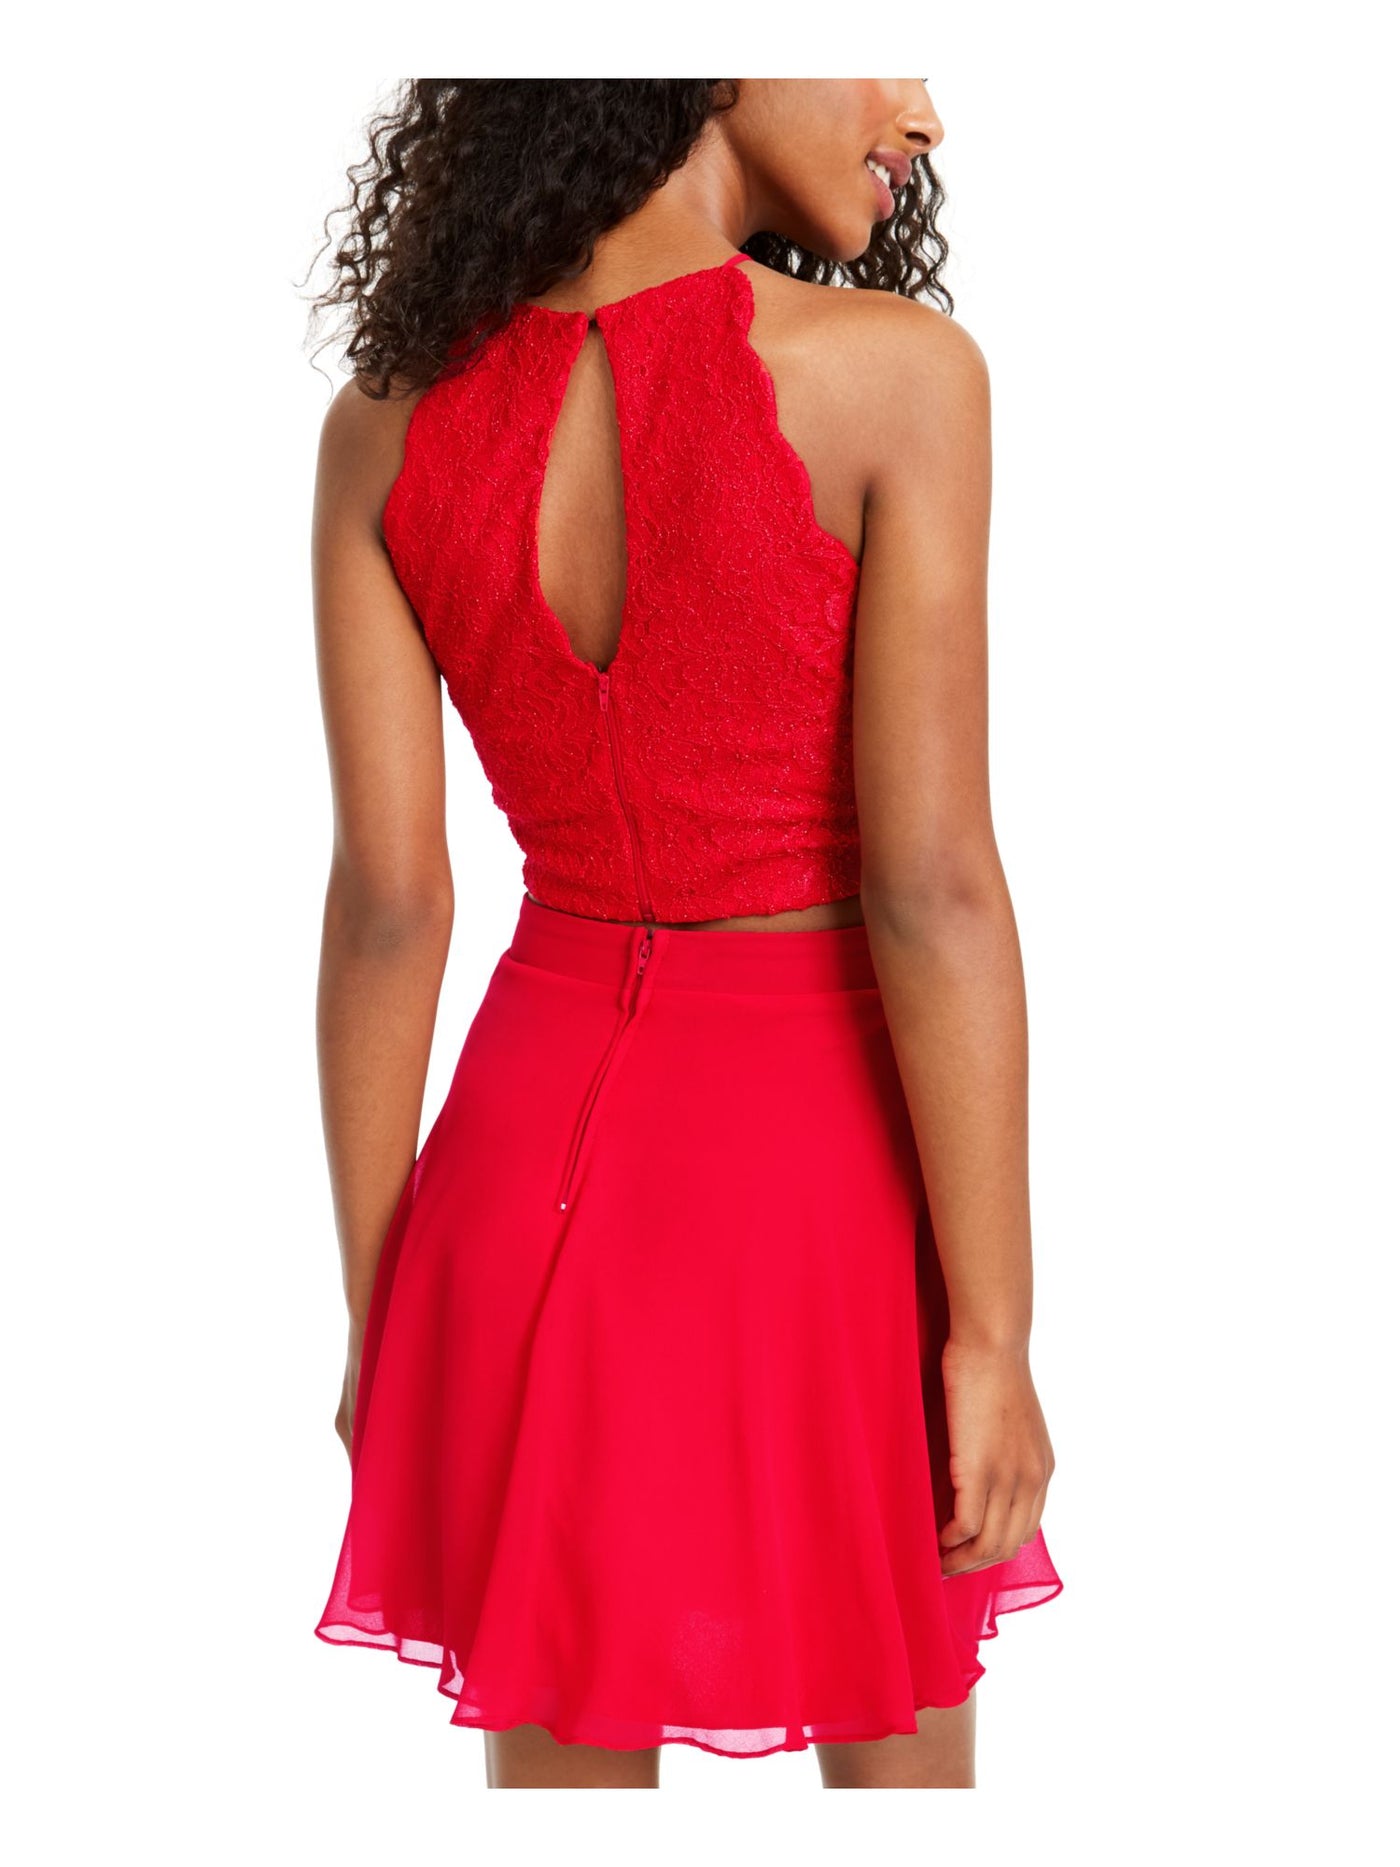 CITY STUDIO Womens Red Embroidered Lace Floral Sleeveless Keyhole Short Cocktail Fit + Flare Dress Juniors 7